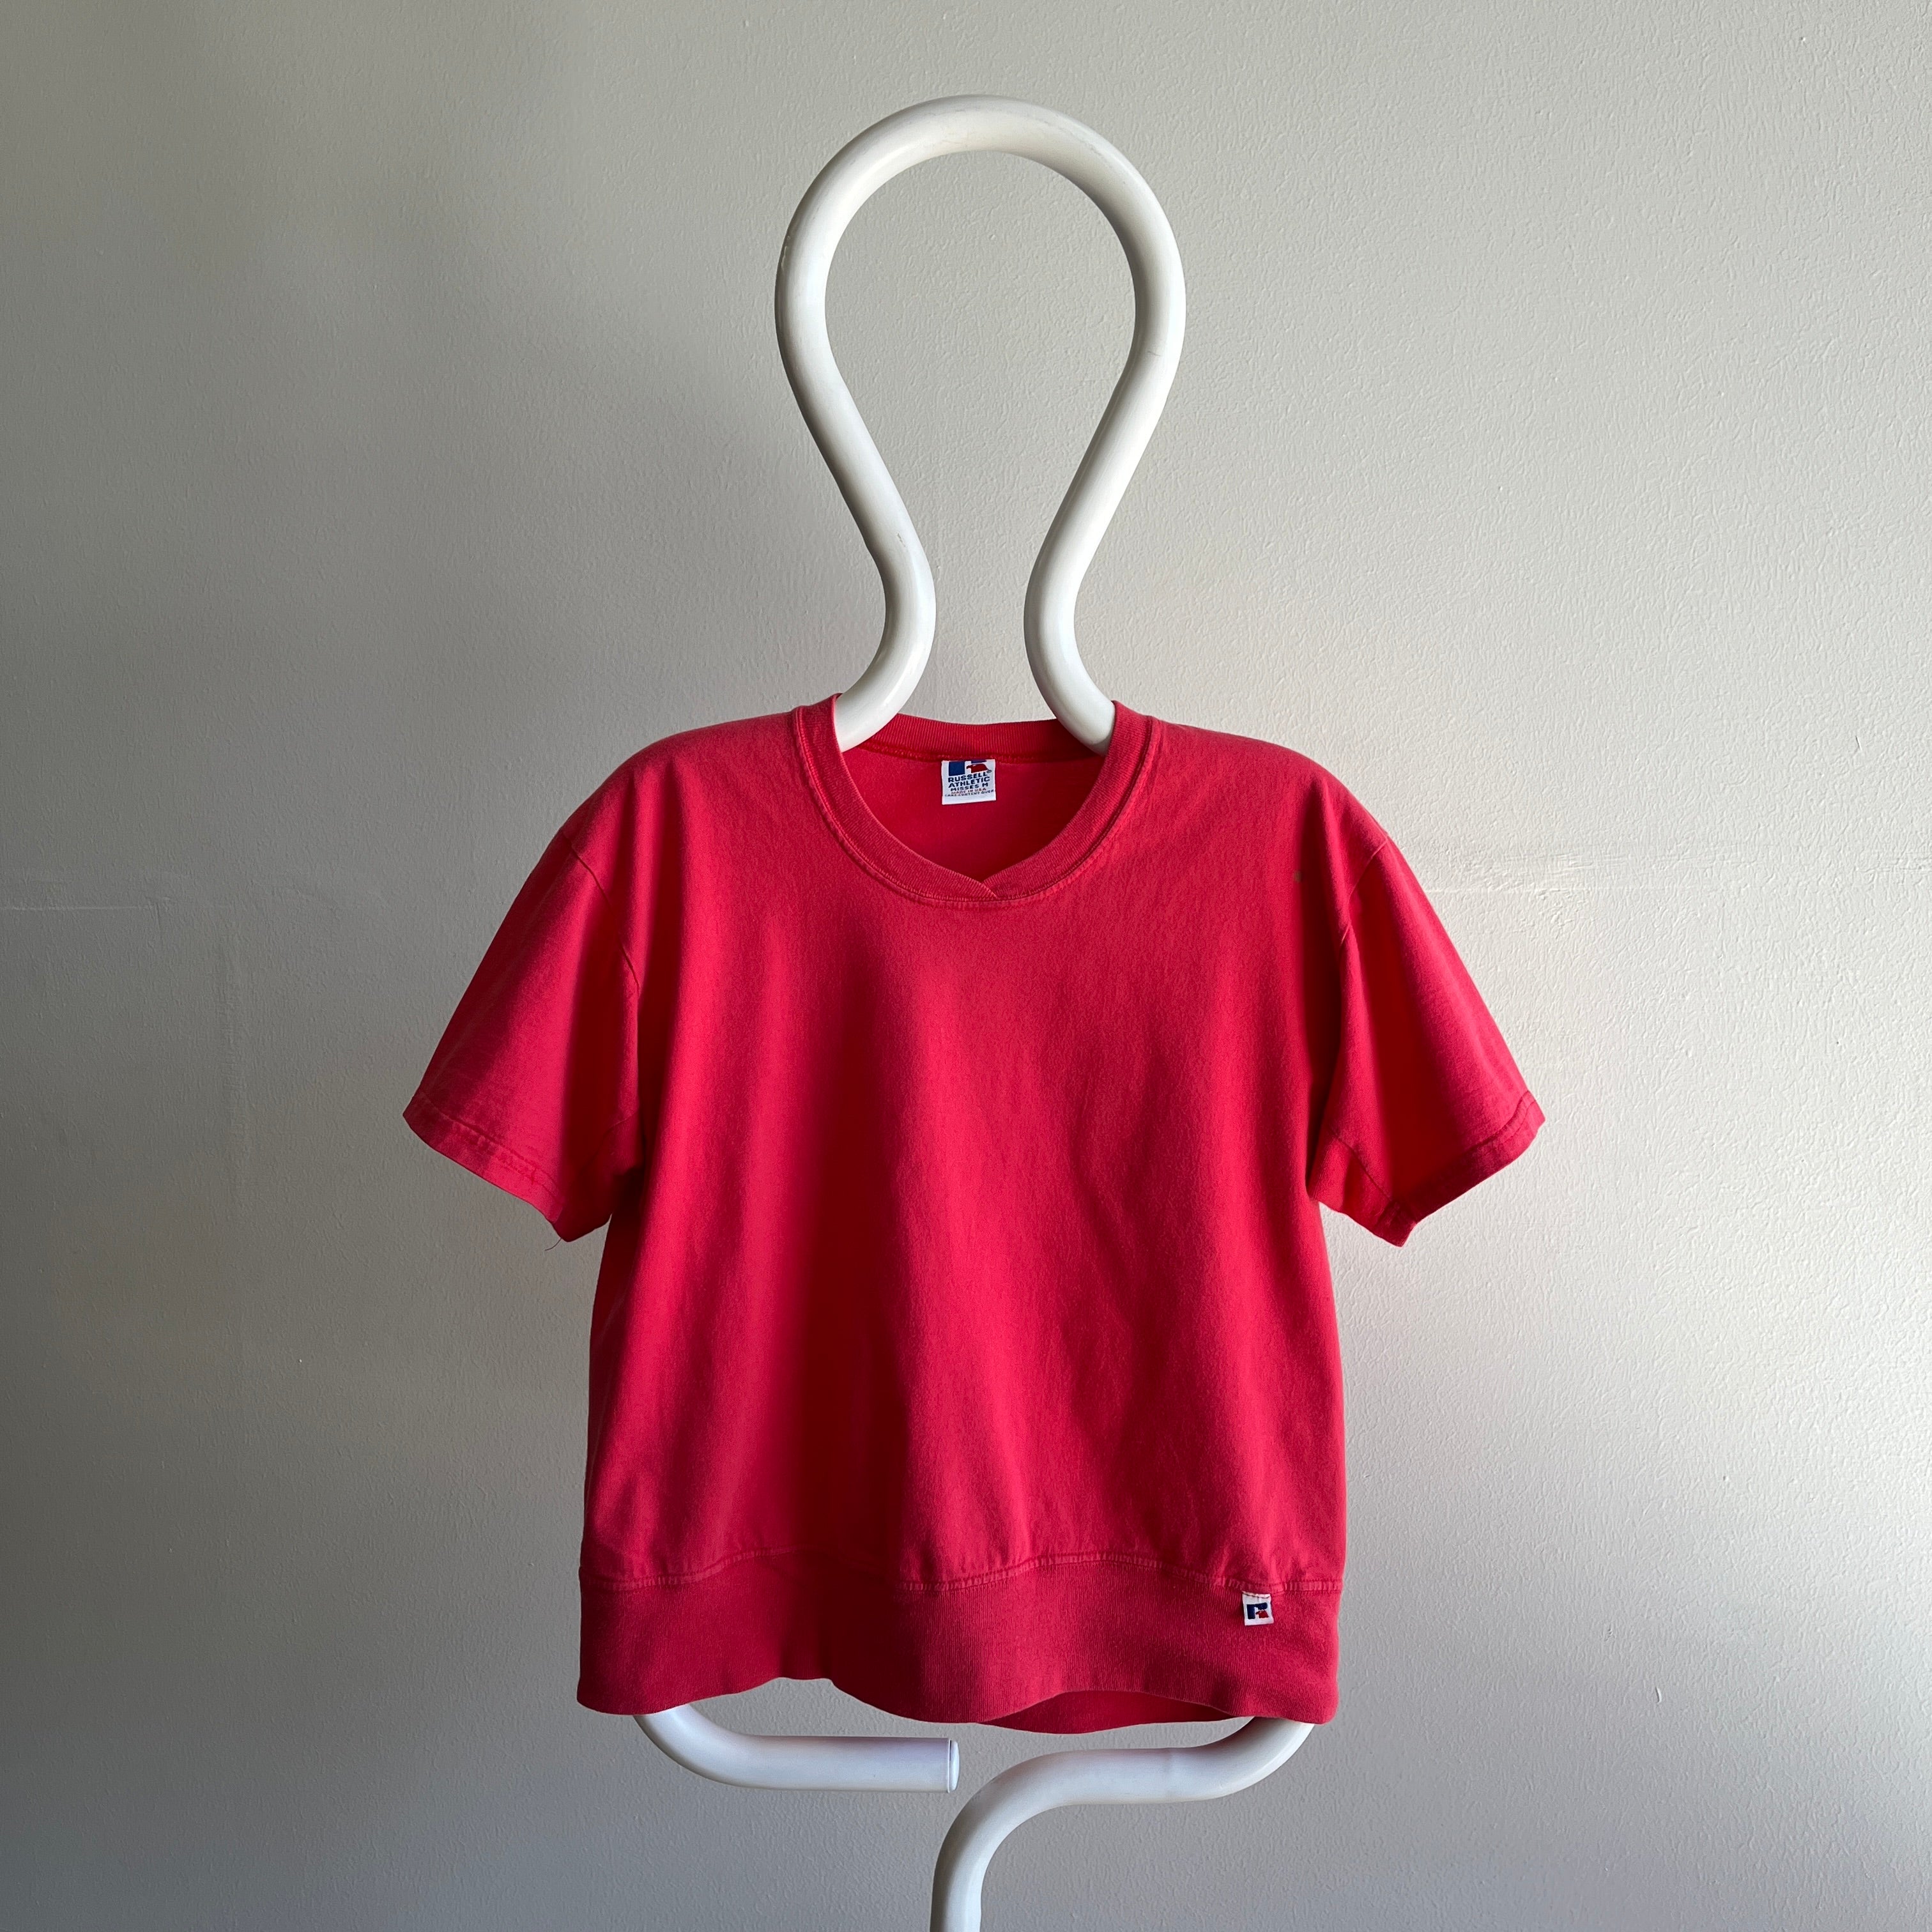 1980s AWESOME Russell Brand T-Shirt/Warm Up Cut - Rouge/Rose